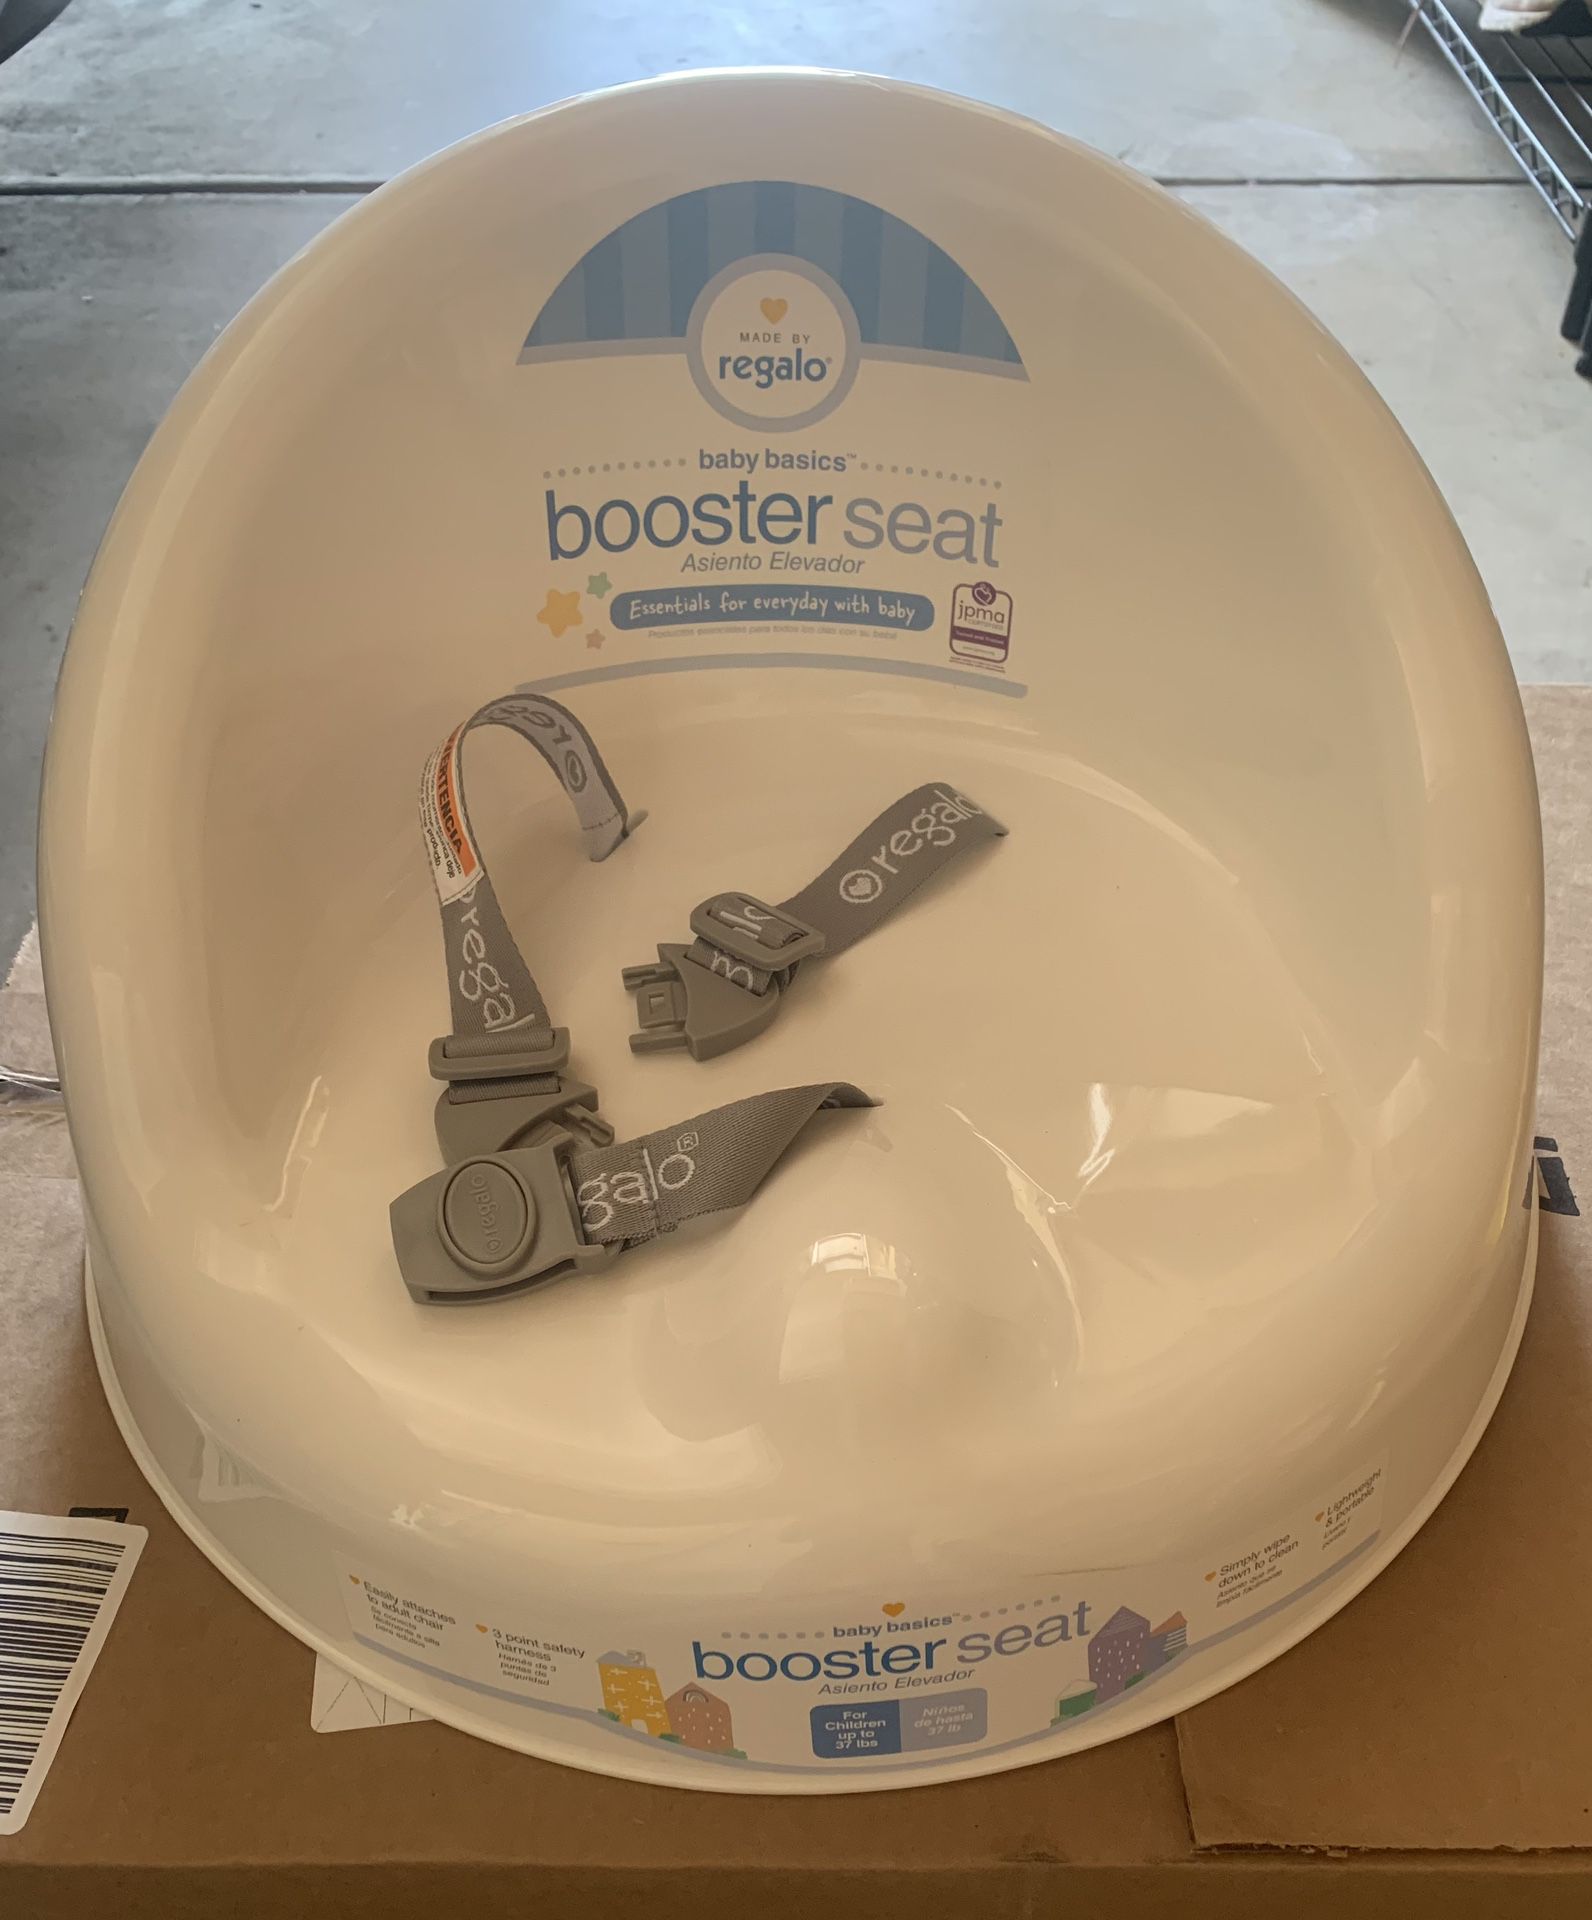 Booster Seat - never used